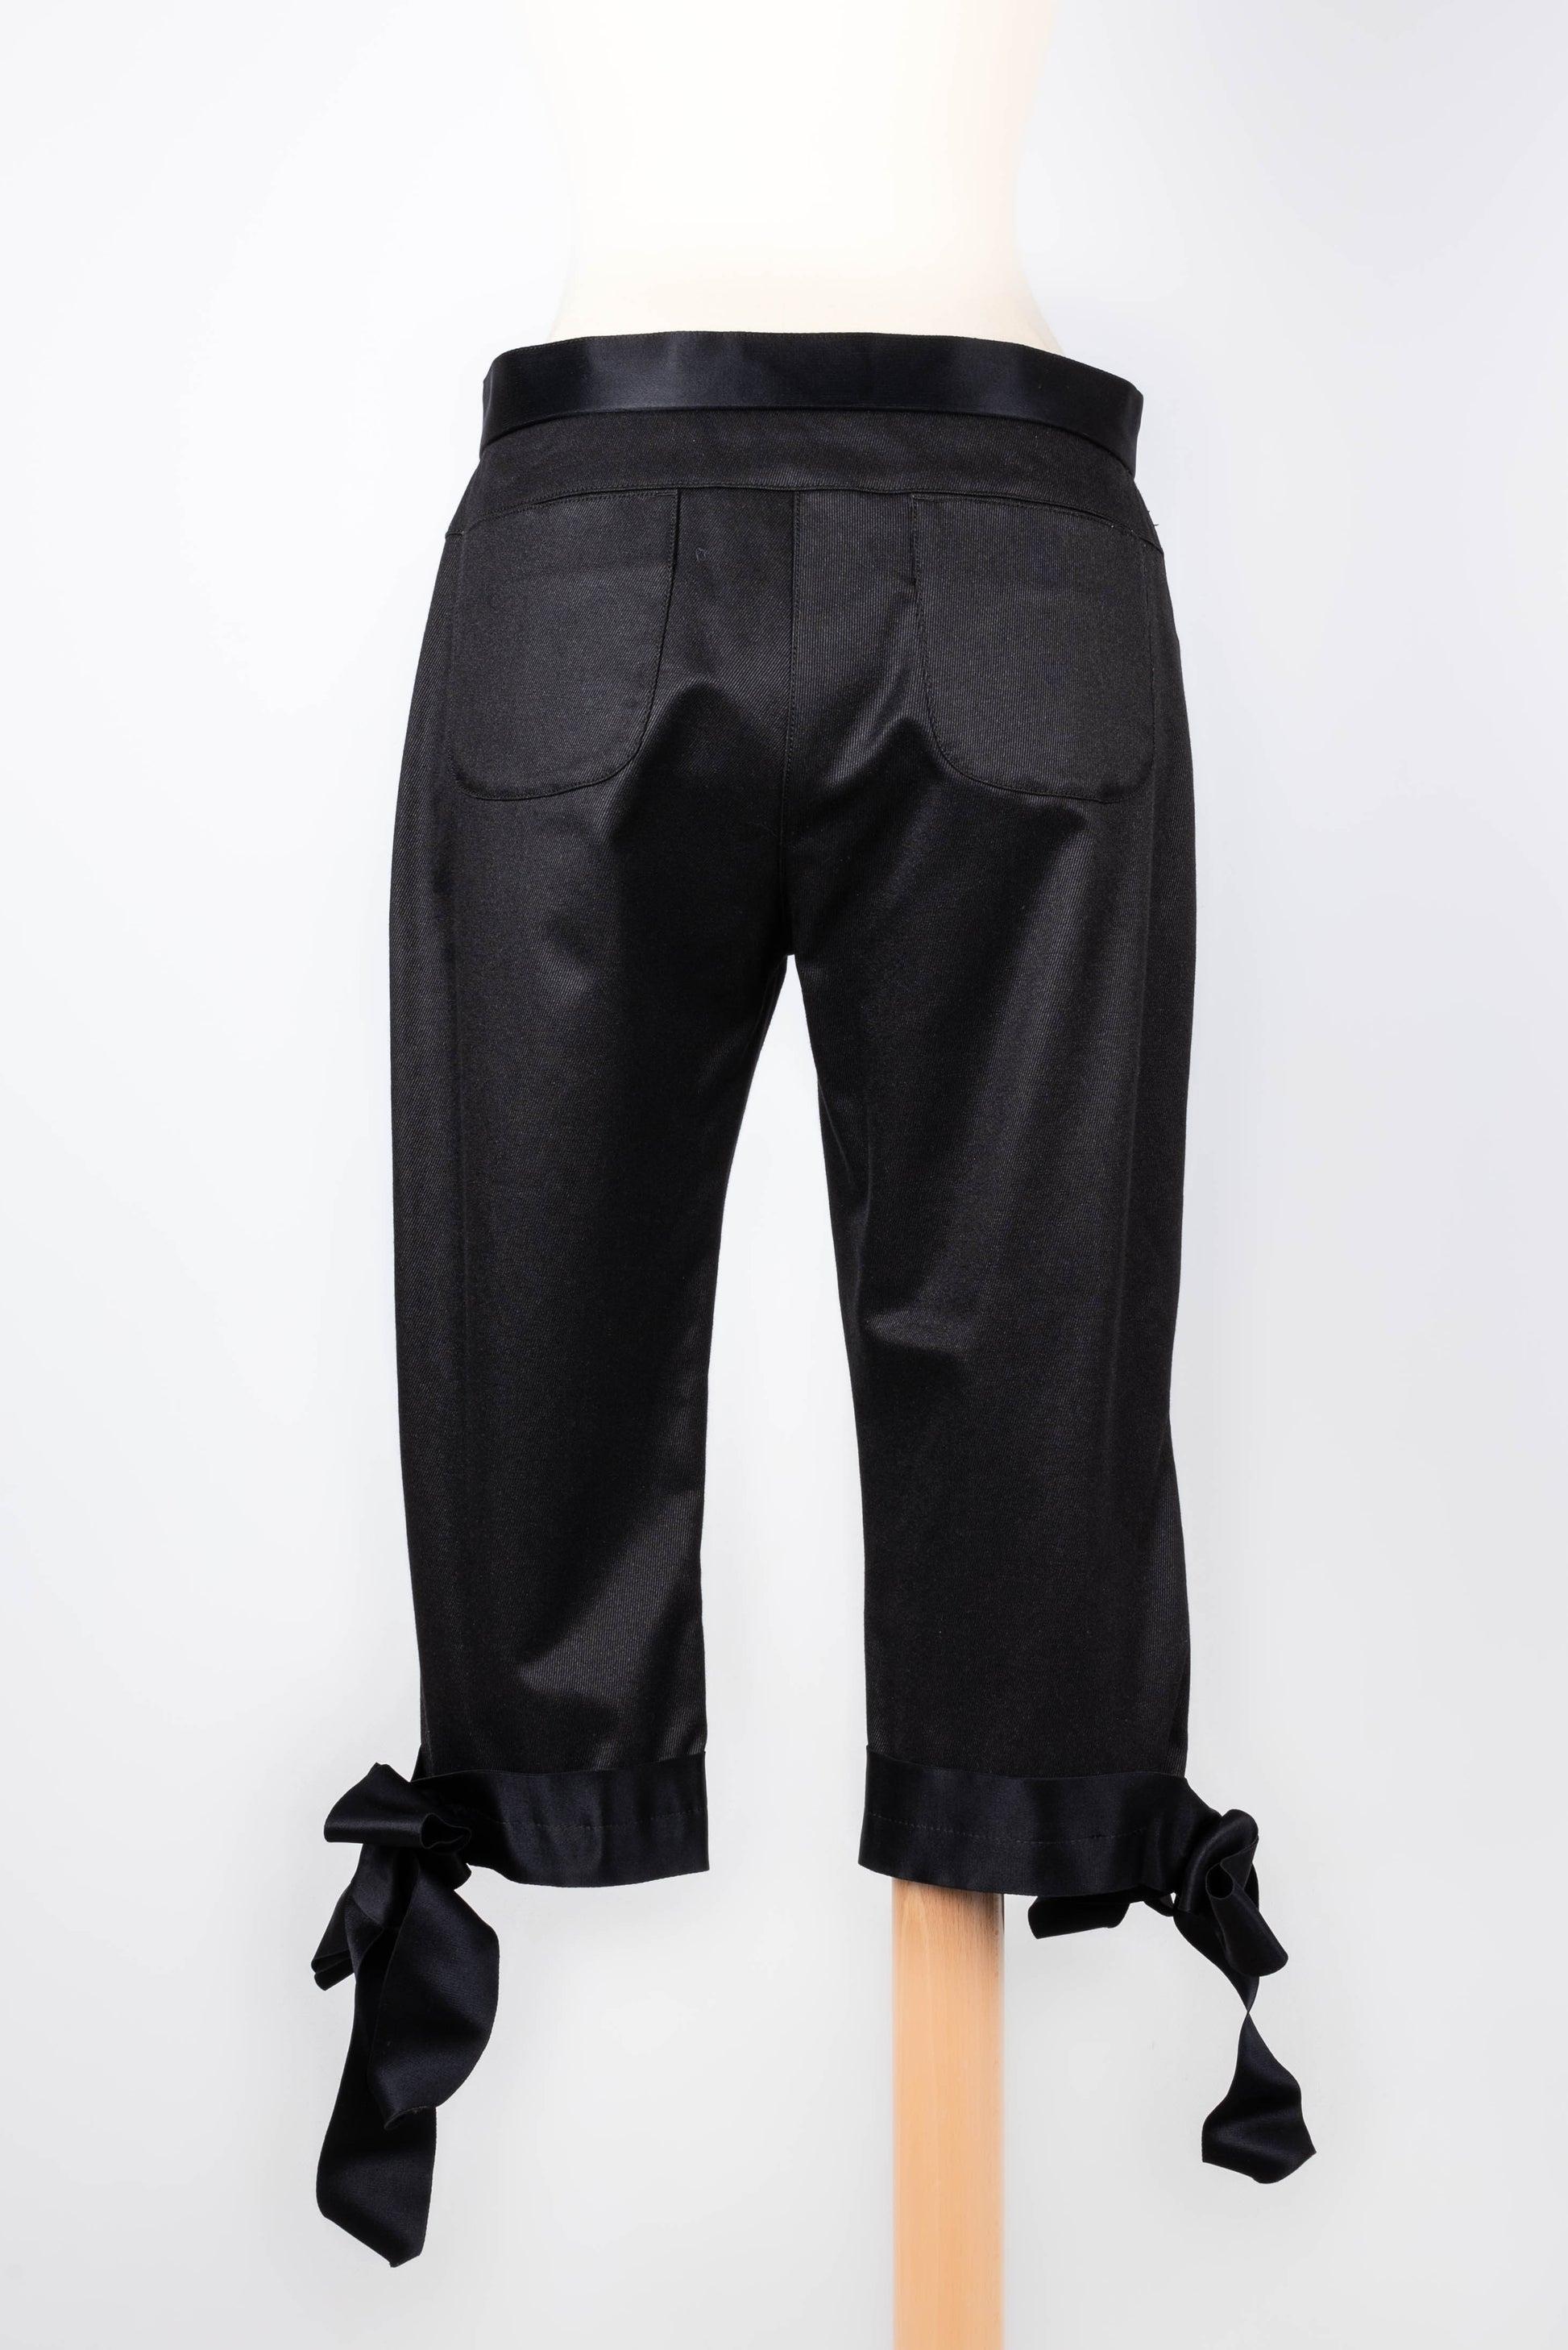 Women's Chanel Capri Pants in Cotton and Silk, 2005 For Sale